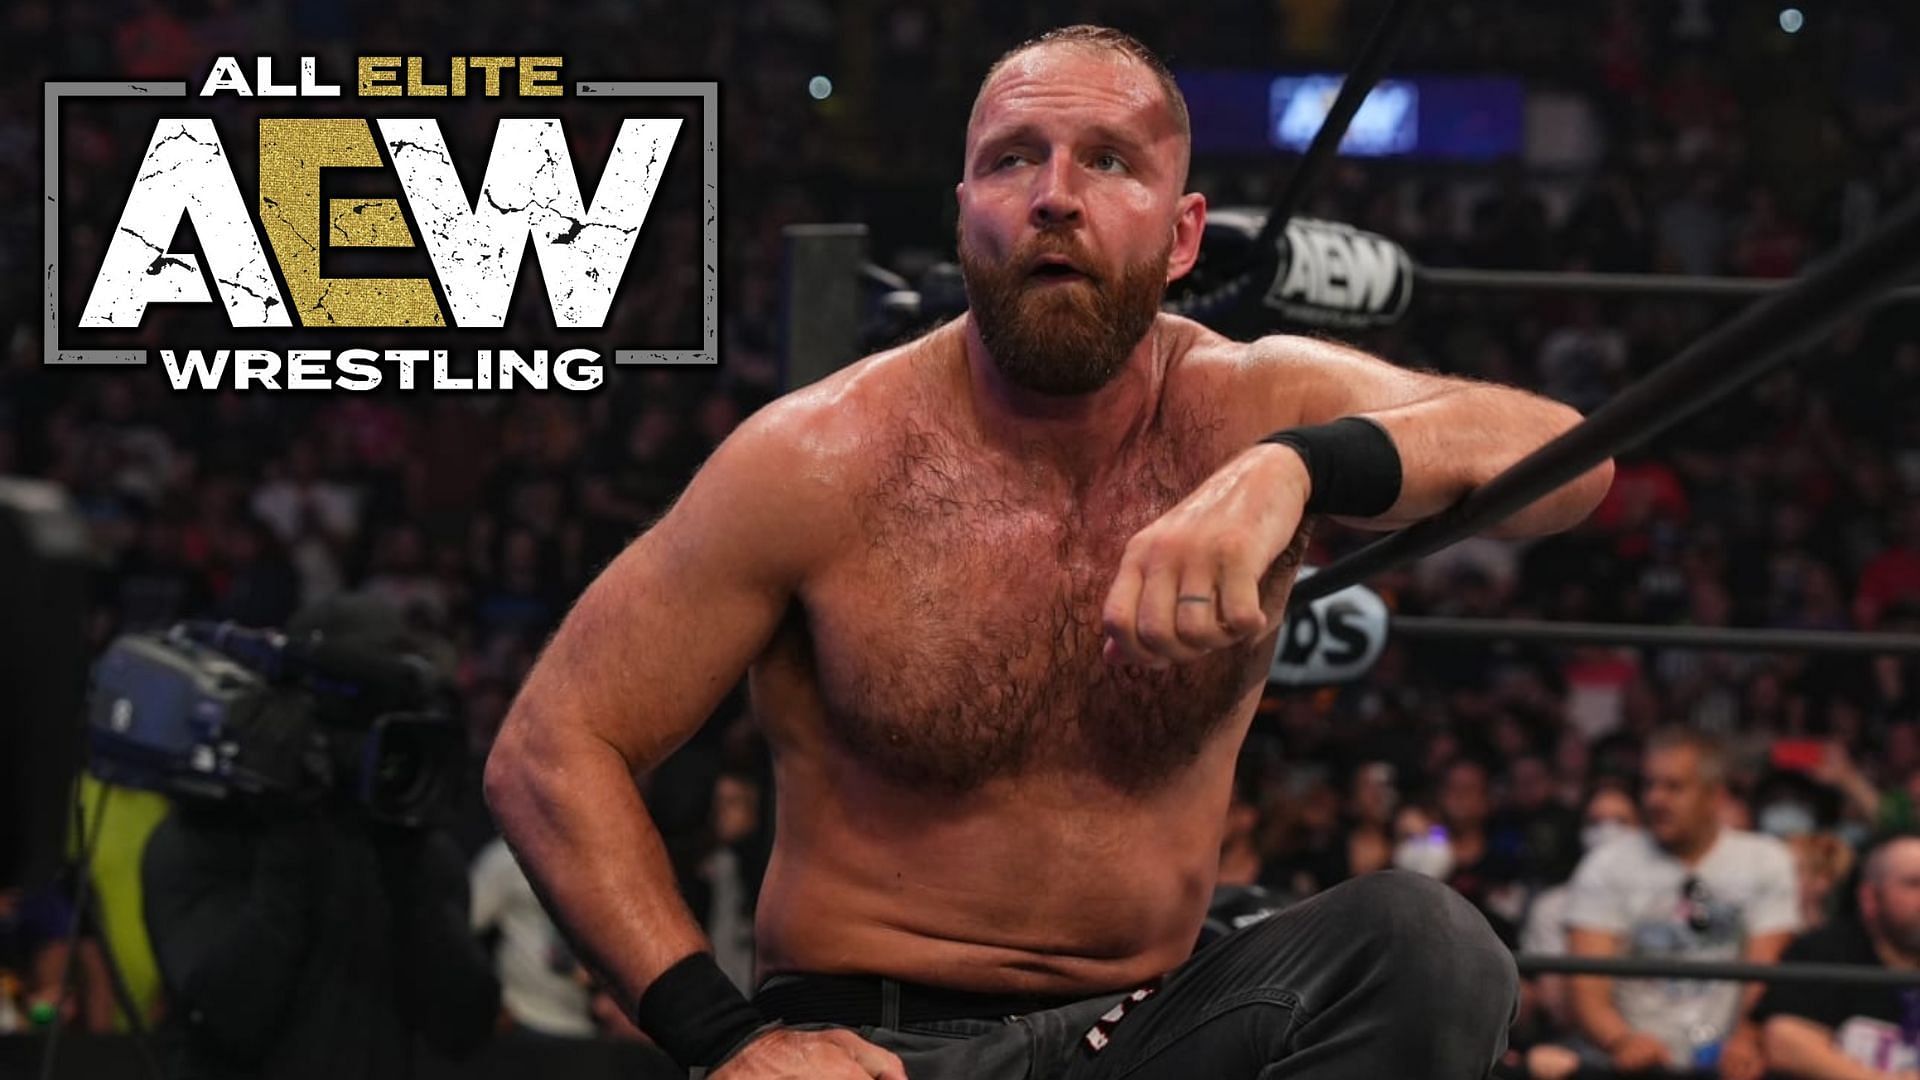 Has Jon Moxley become far too violent?